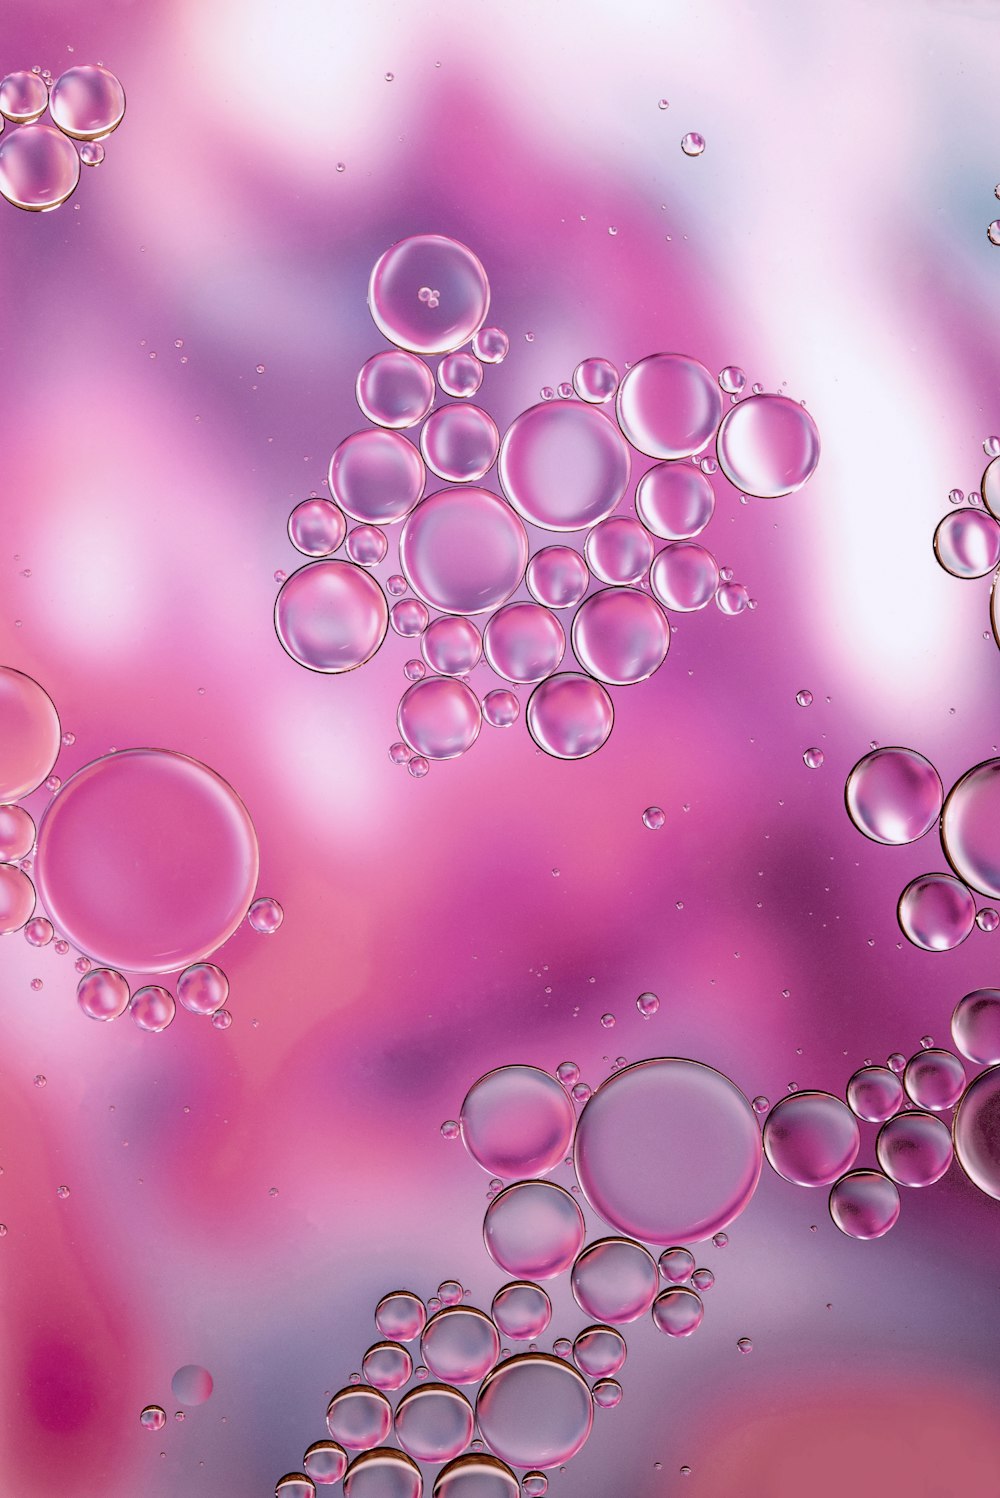 a close up of bubbles on a purple and pink background